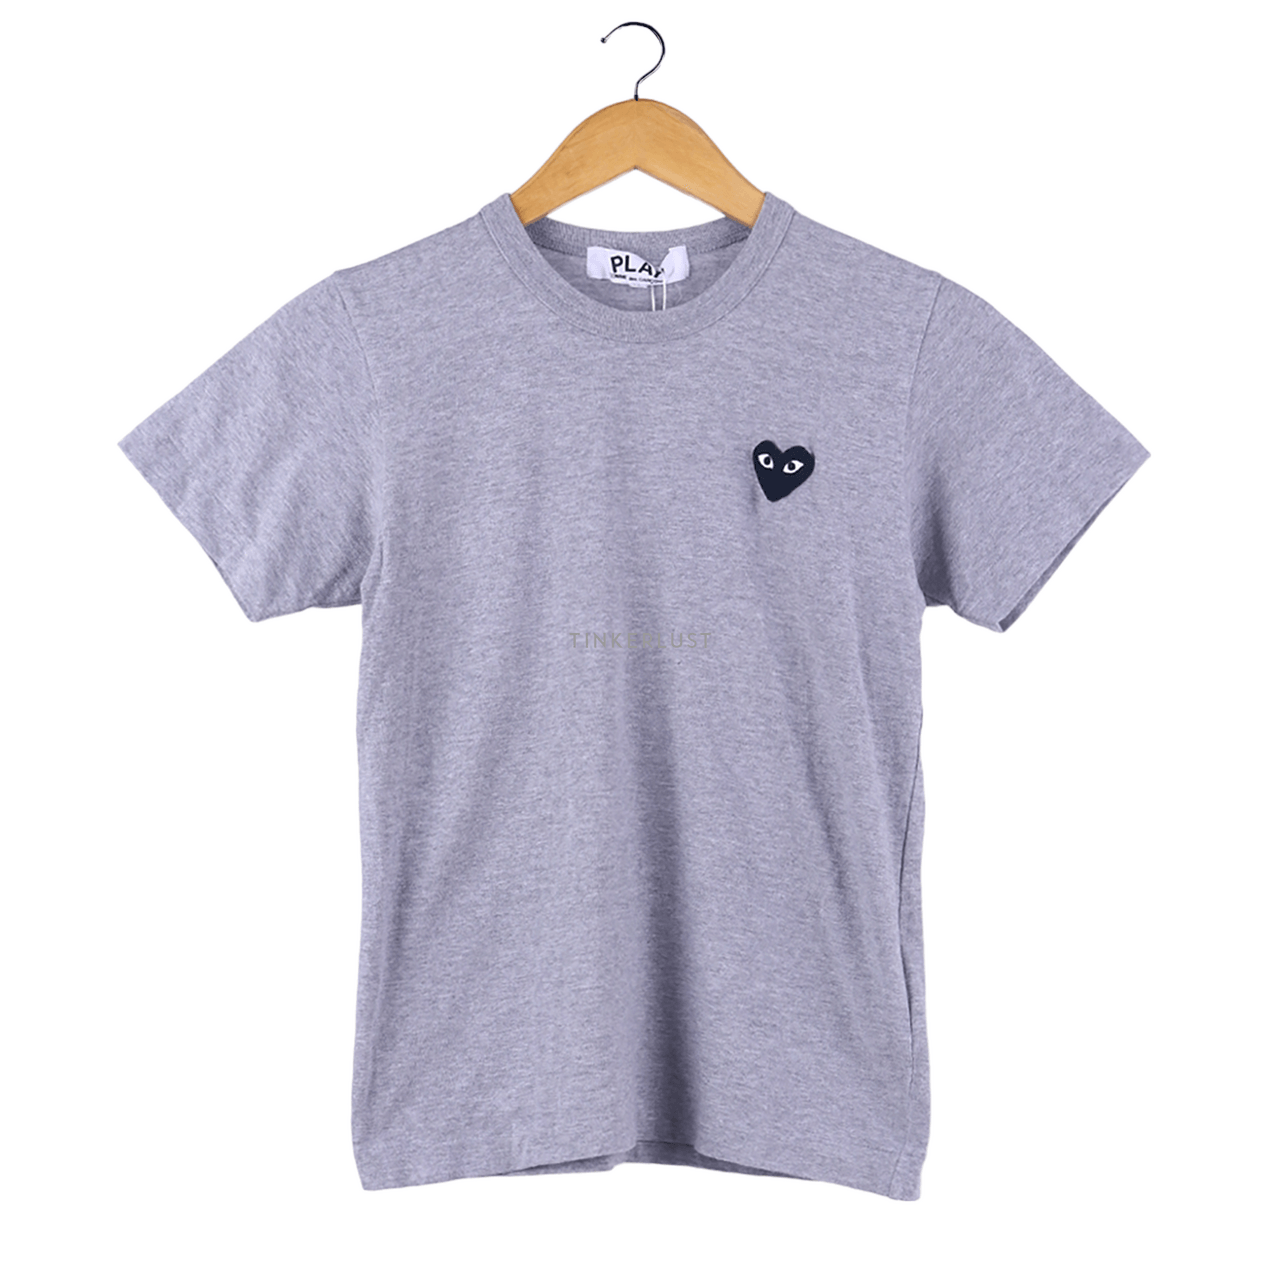 Play by Comme des Garcons Grey Black Heart T-Shirt